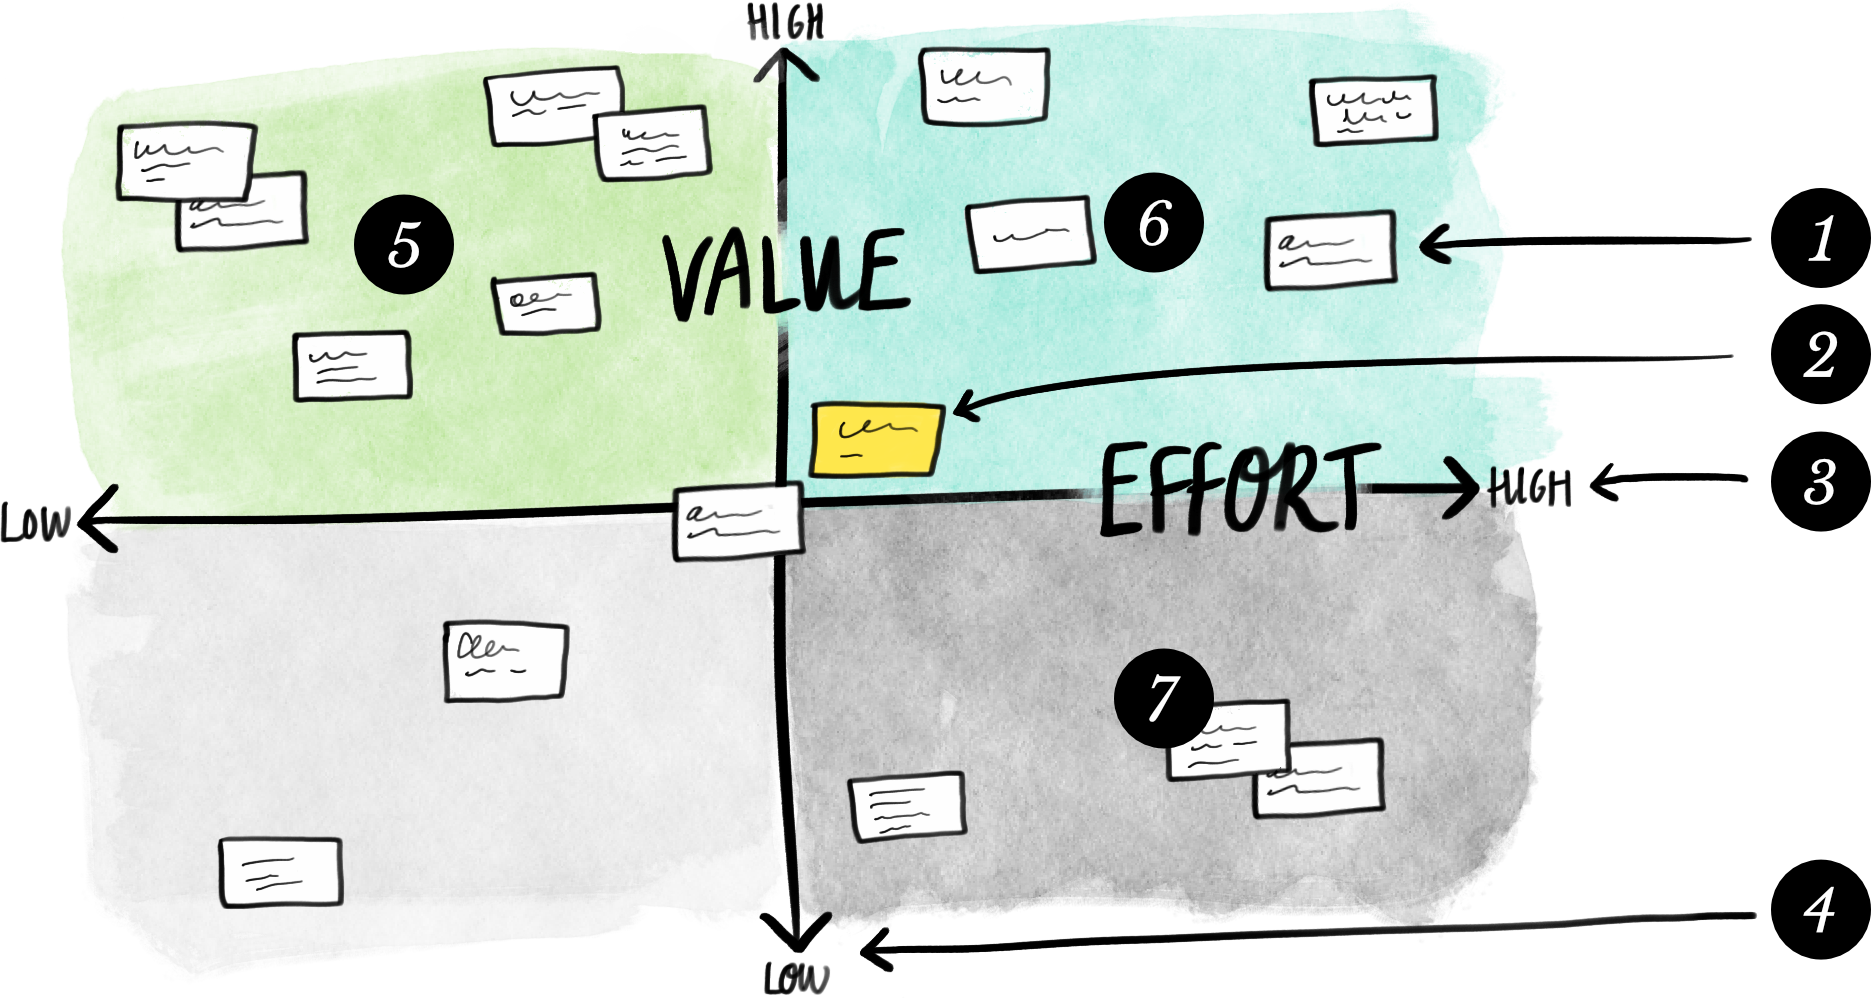 The Value/Effort Map has a horizontal Effort axis, from low to high, and a vertical Value axis, also low to high. This creates four quarters from low effort/low value to high effort/high value. Work, activities, or tasks are arranged appropriately.